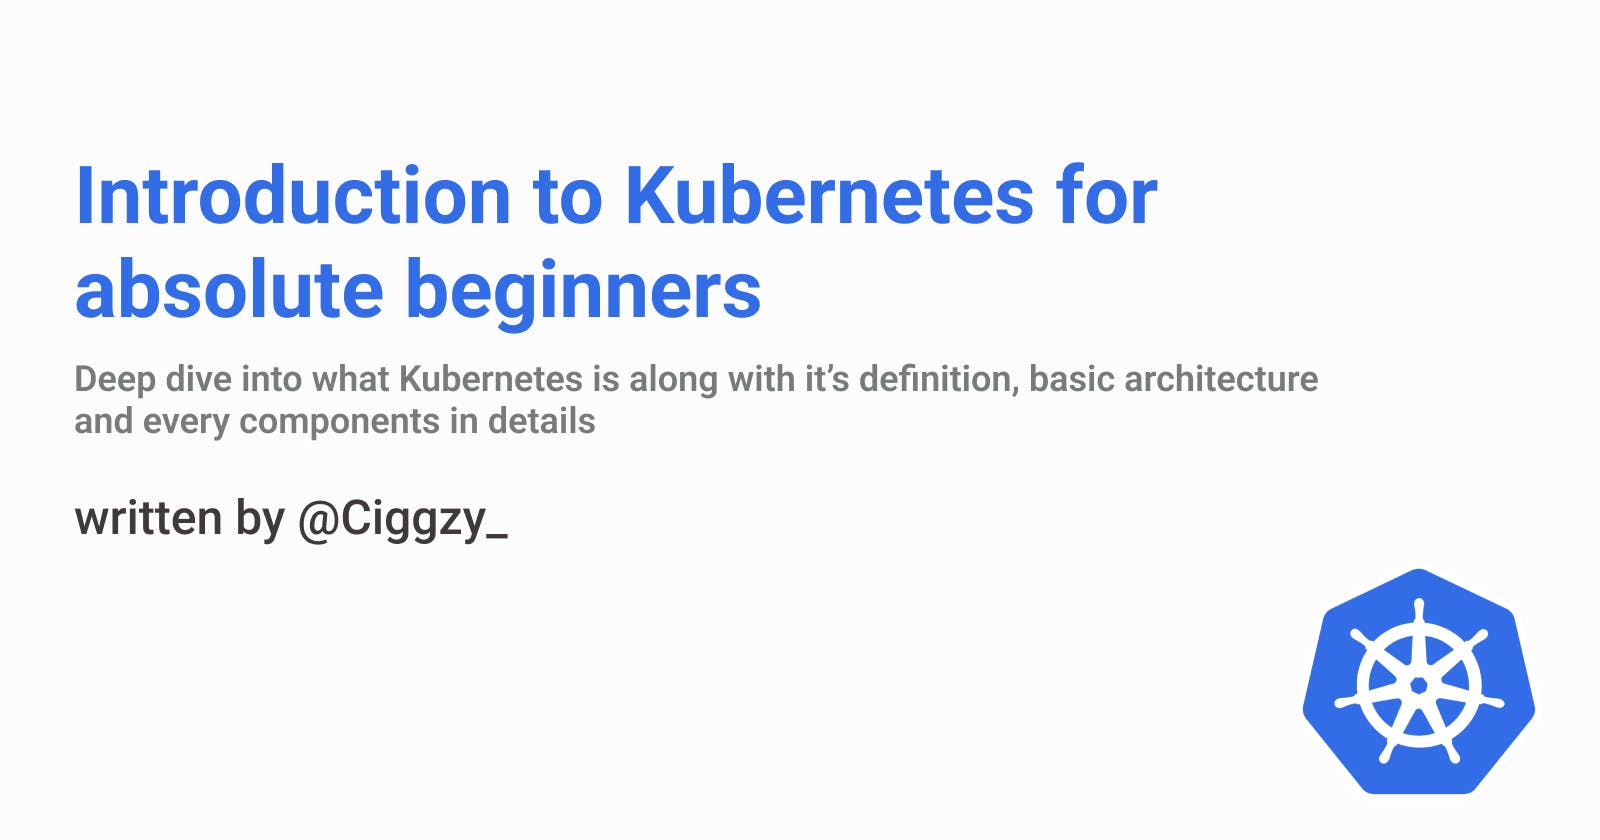 Introduction to Kubernetes for absolute beginners